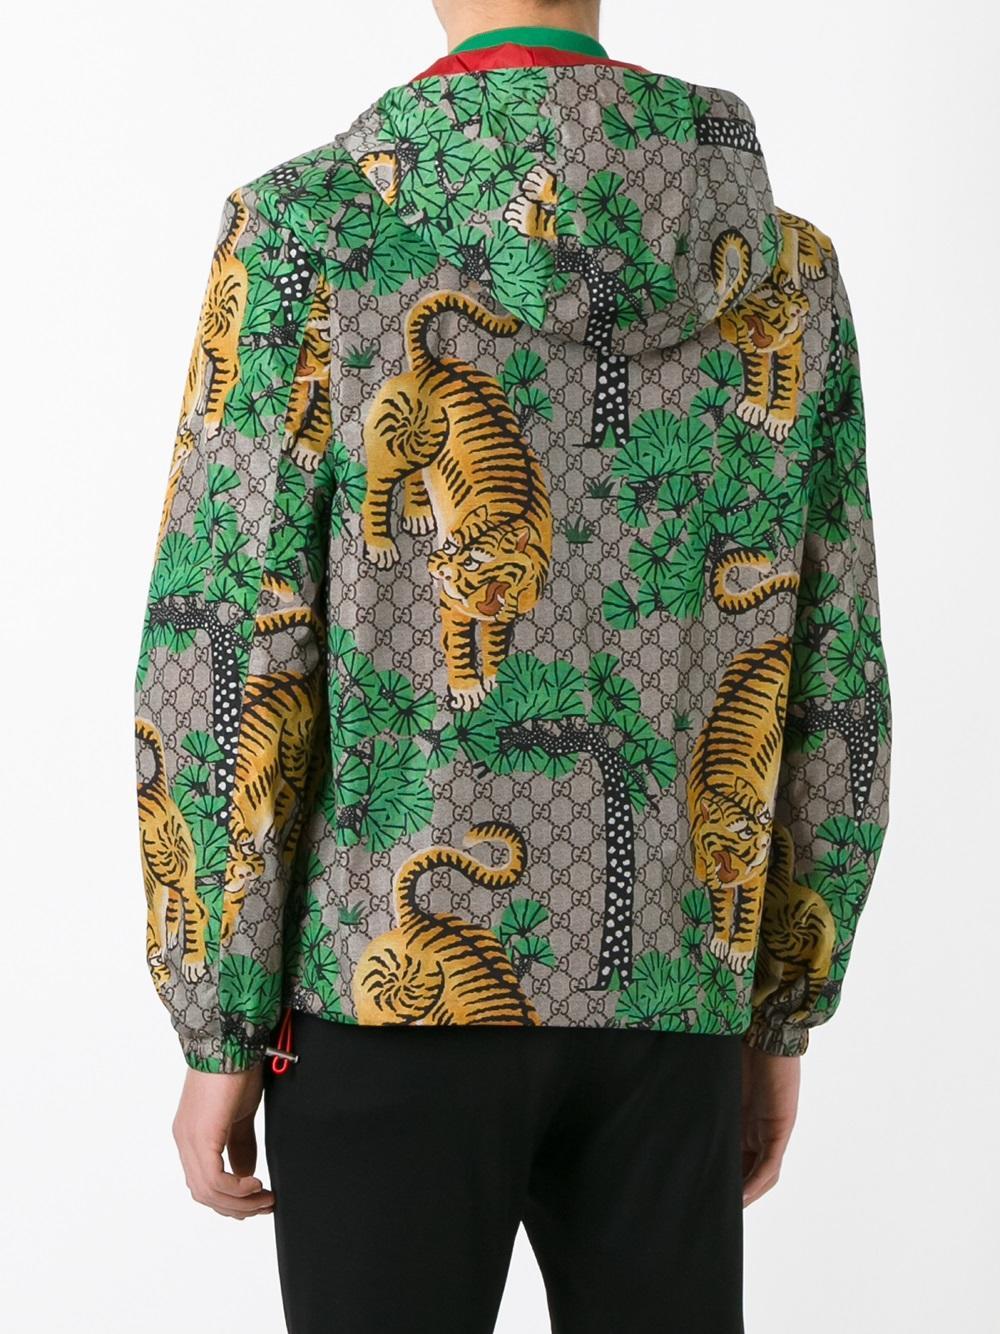 Lyst - Gucci ' Bengal' Print Jacket in Green for Men